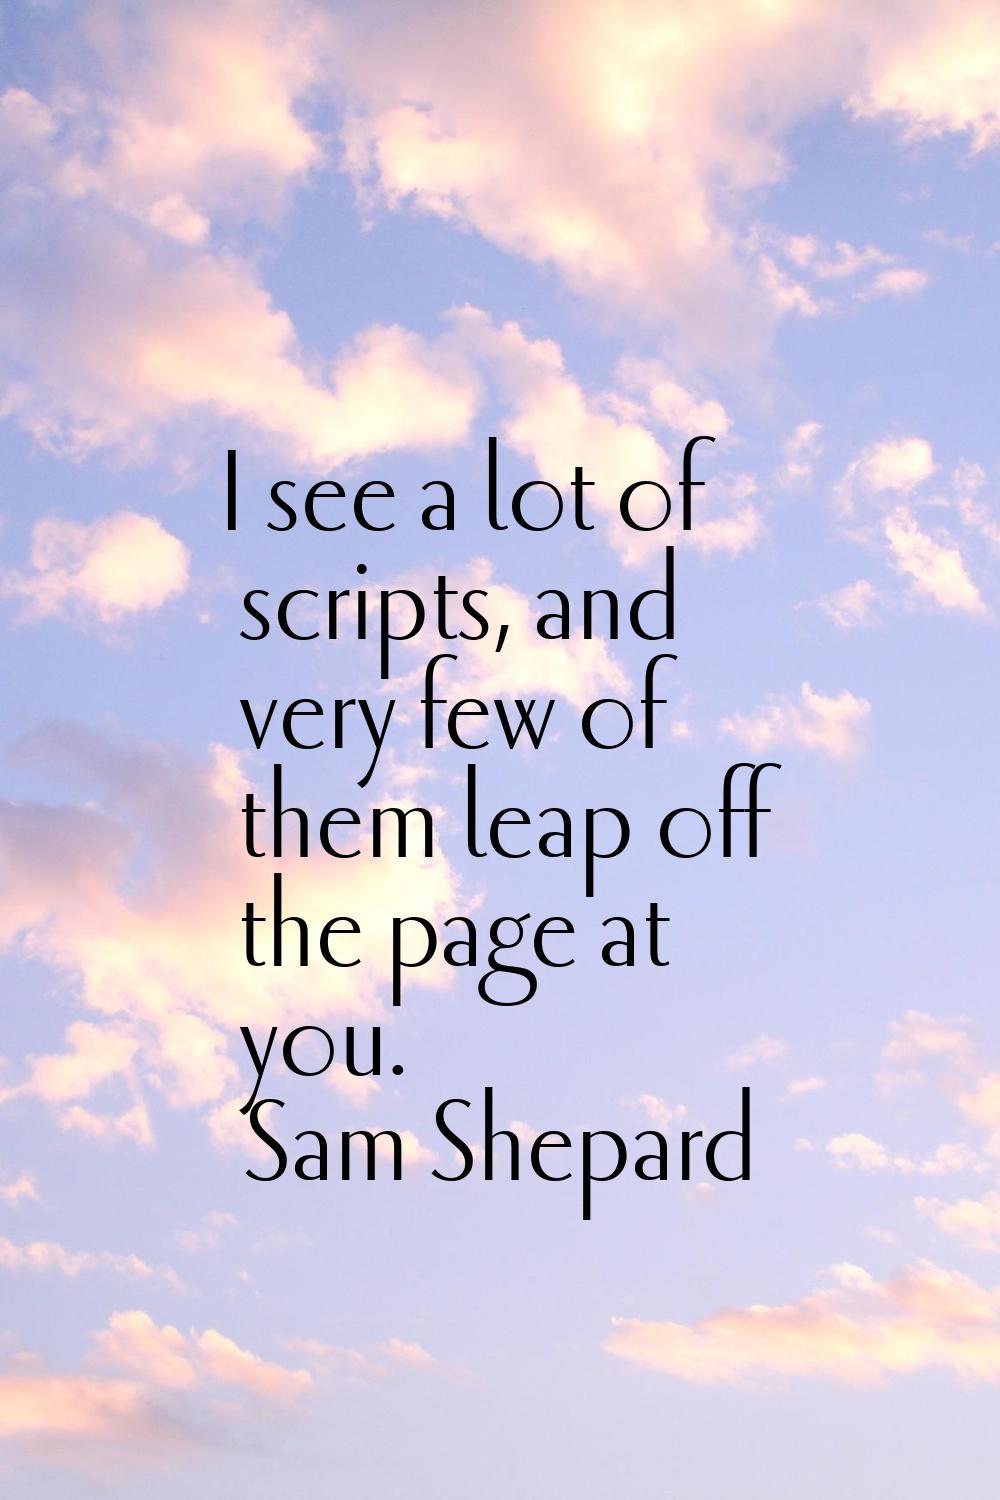 I see a lot of scripts, and very few of them leap off the page at you.